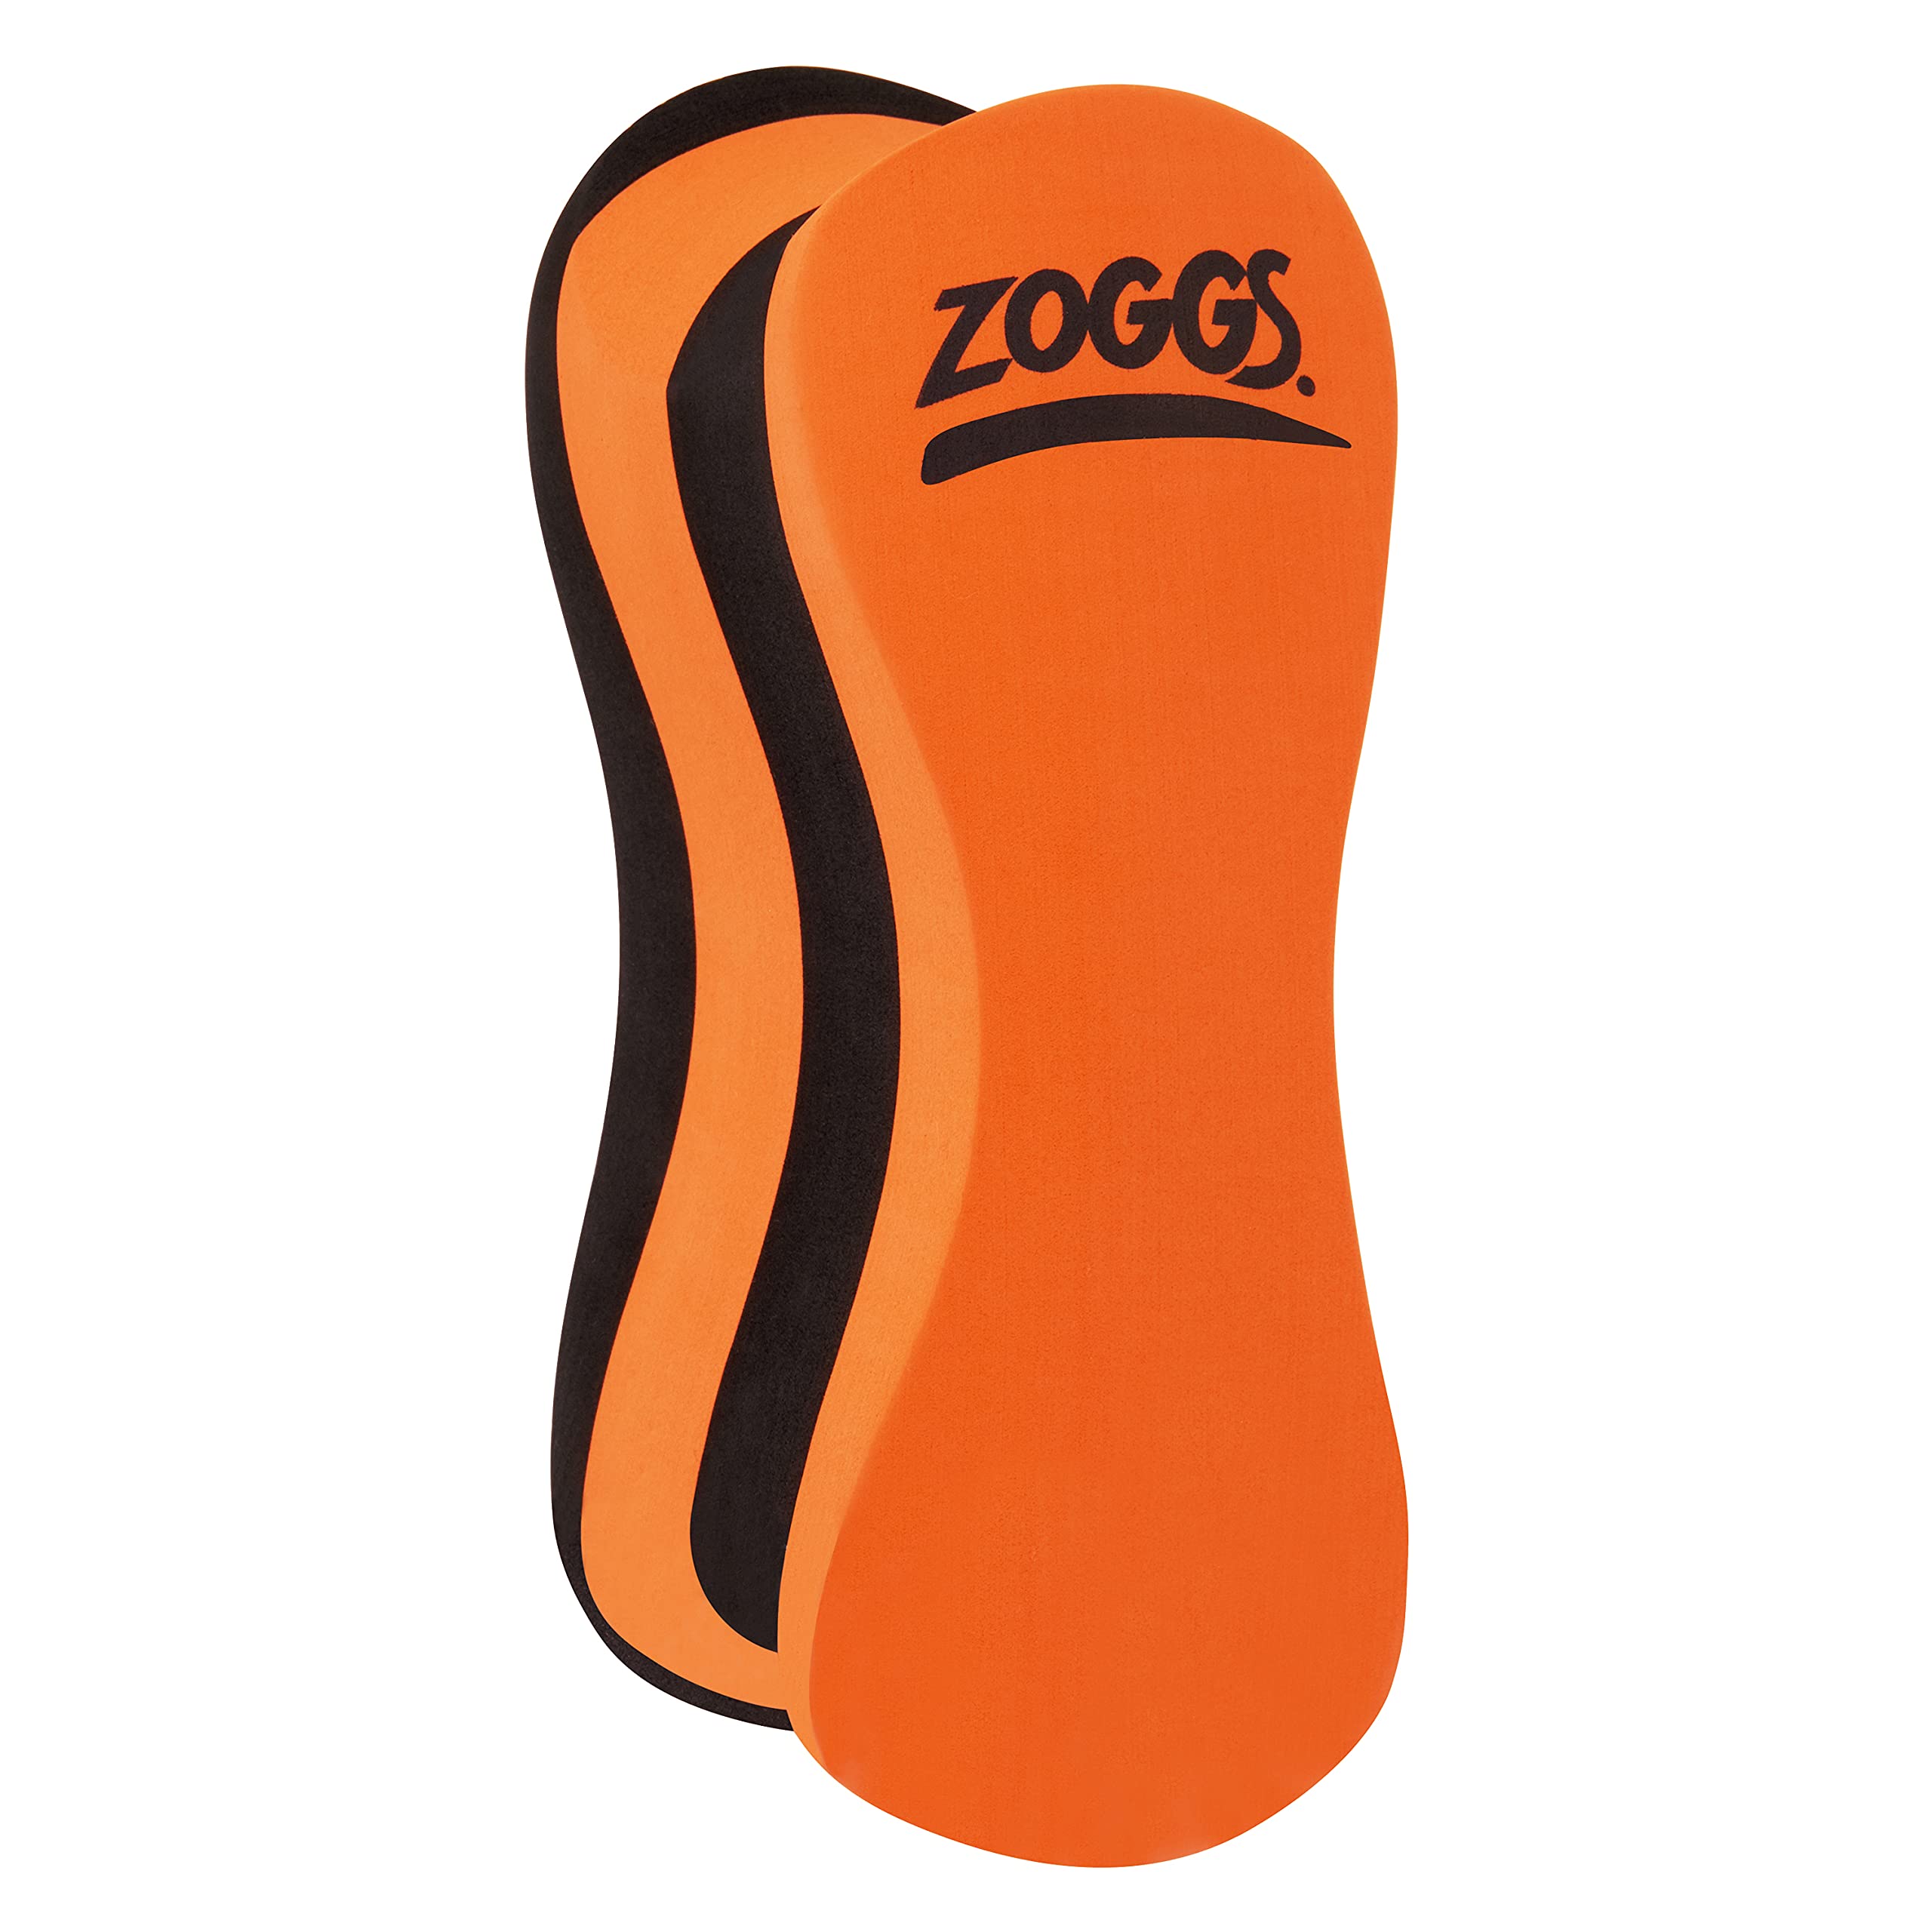 Zoggs Adult Pull Buoy